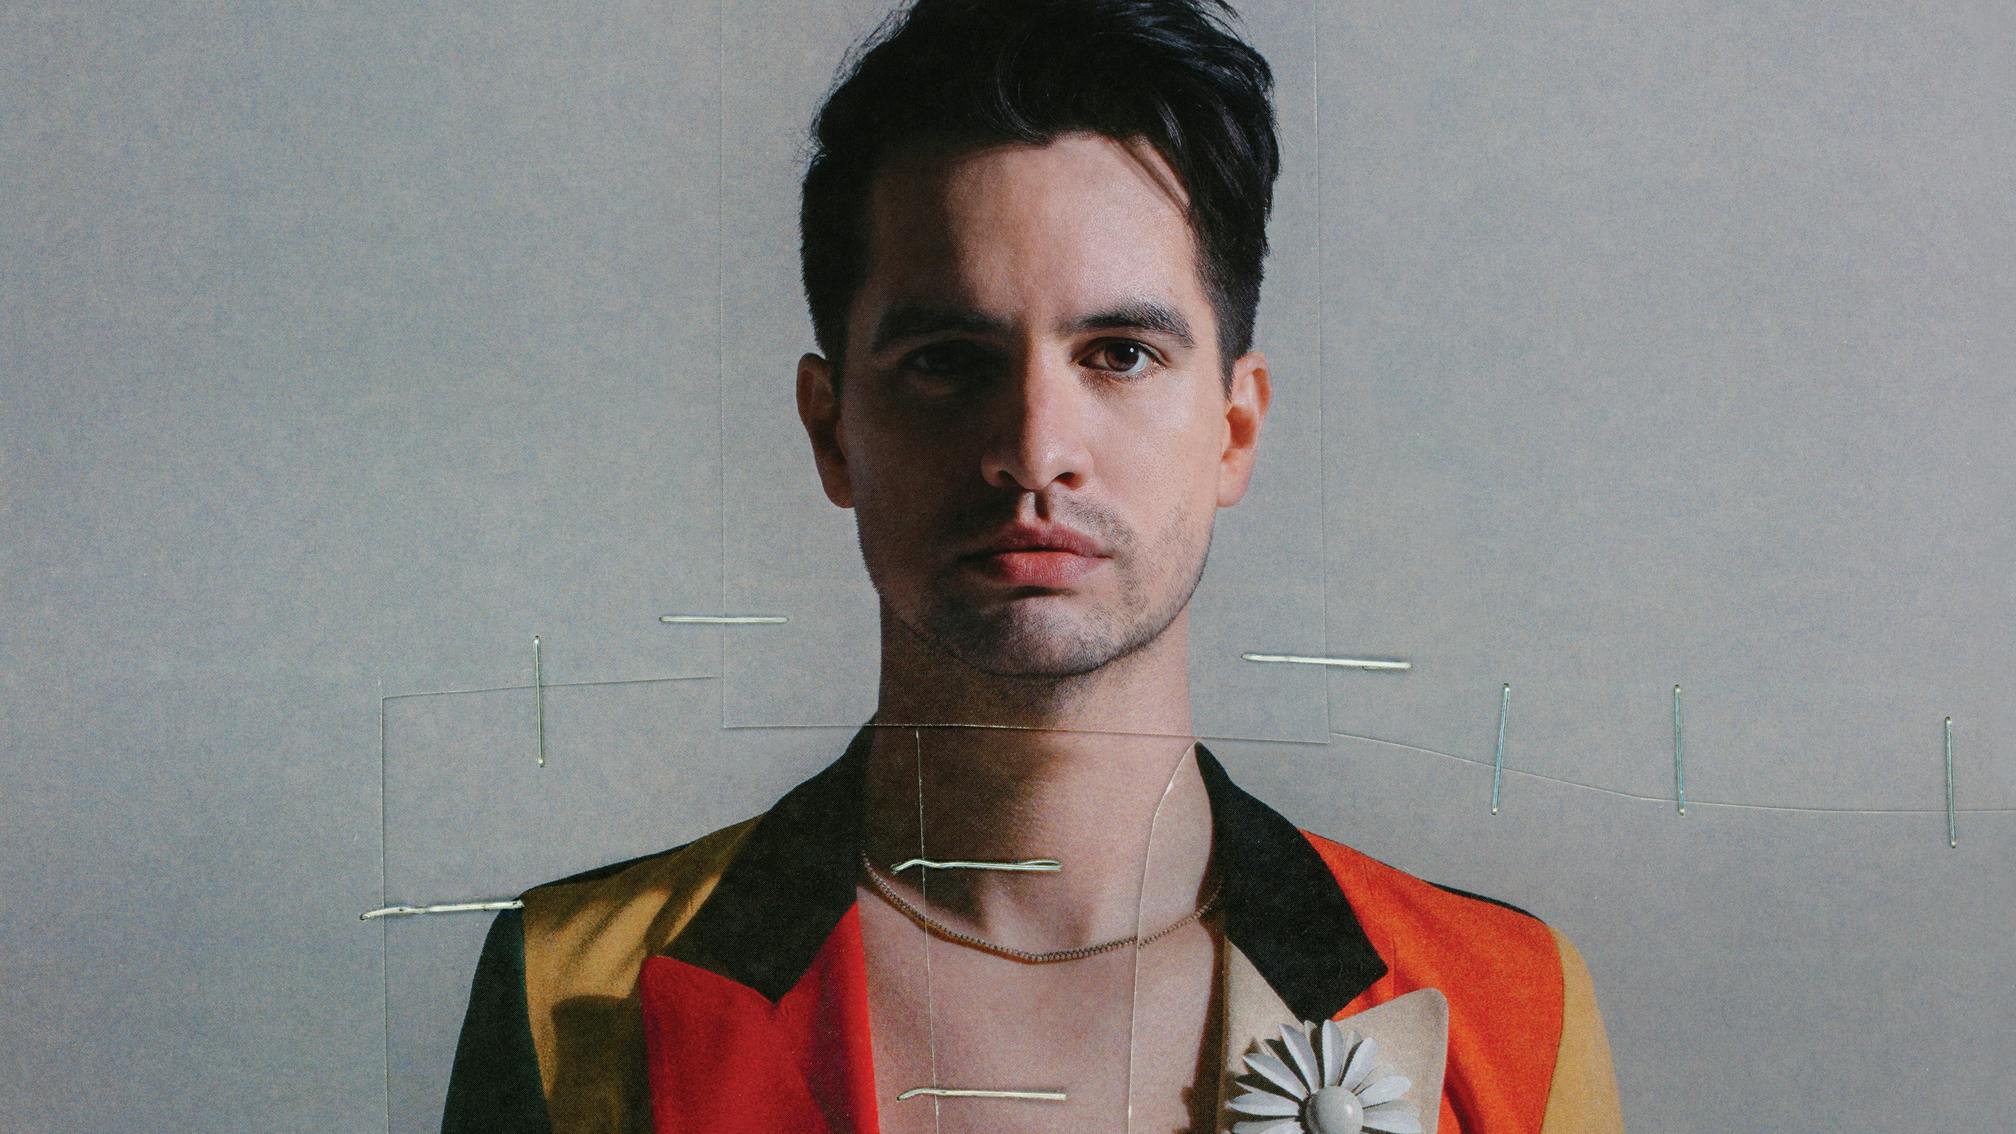 Panic! At The Disco donating tour proceeds to Highest Hopes Foundation